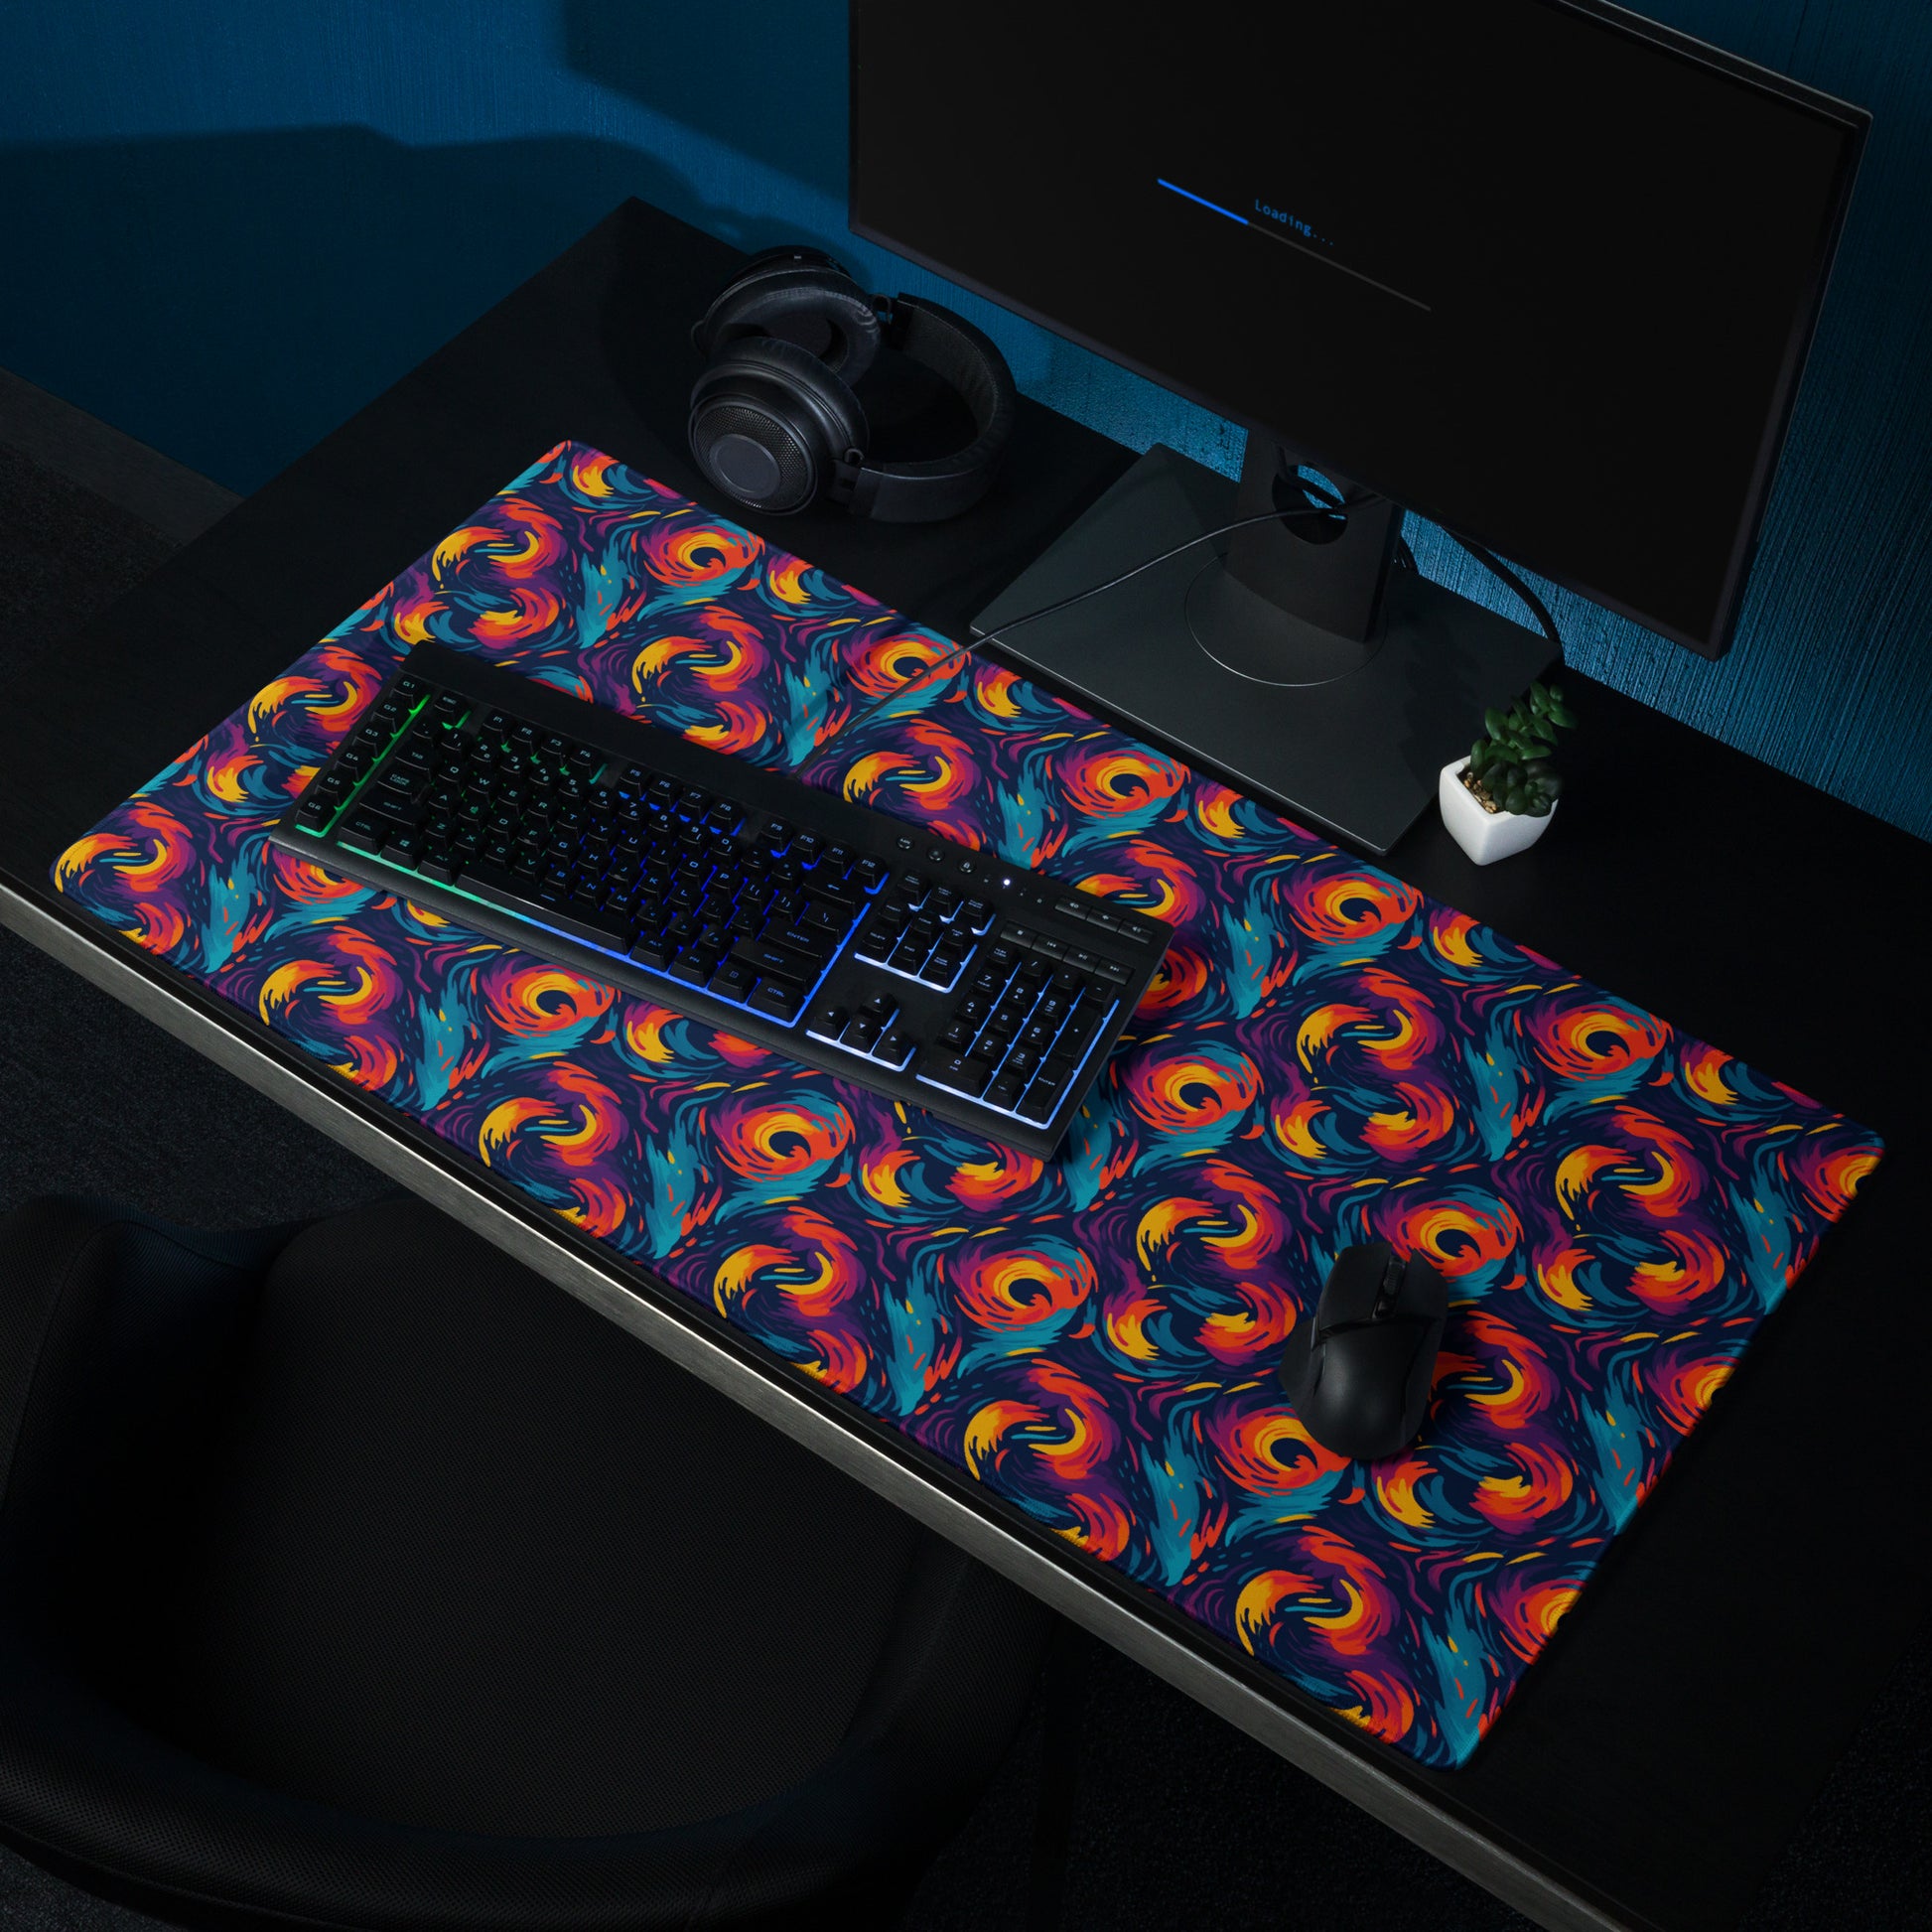 A 36" x 18" desk pad with fiery swirls on it shown on a desk setup. Red and Blue in color.